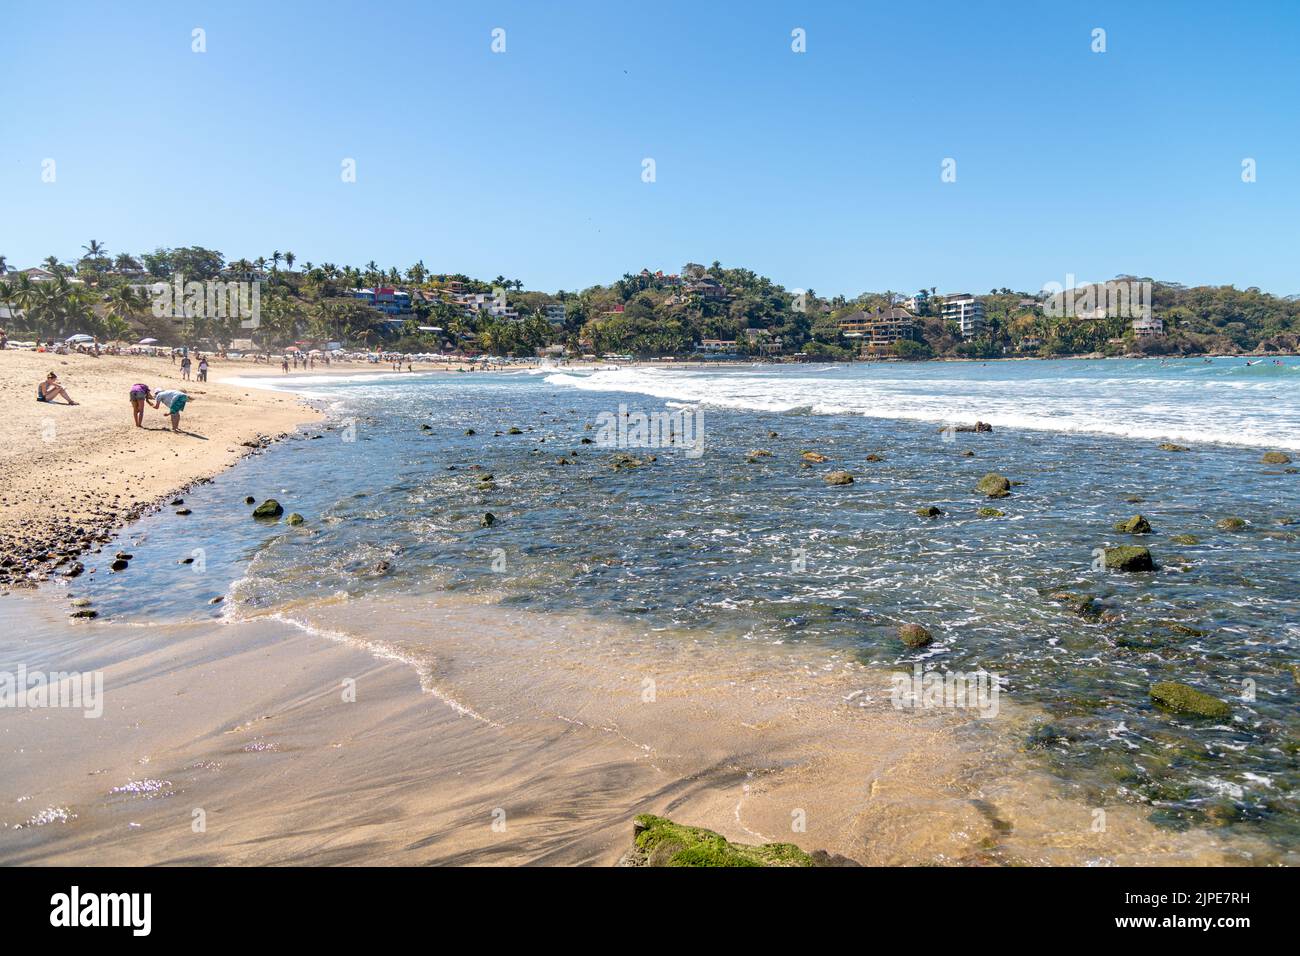 A view of the coast in Sayulita, Mexico Stock Photo